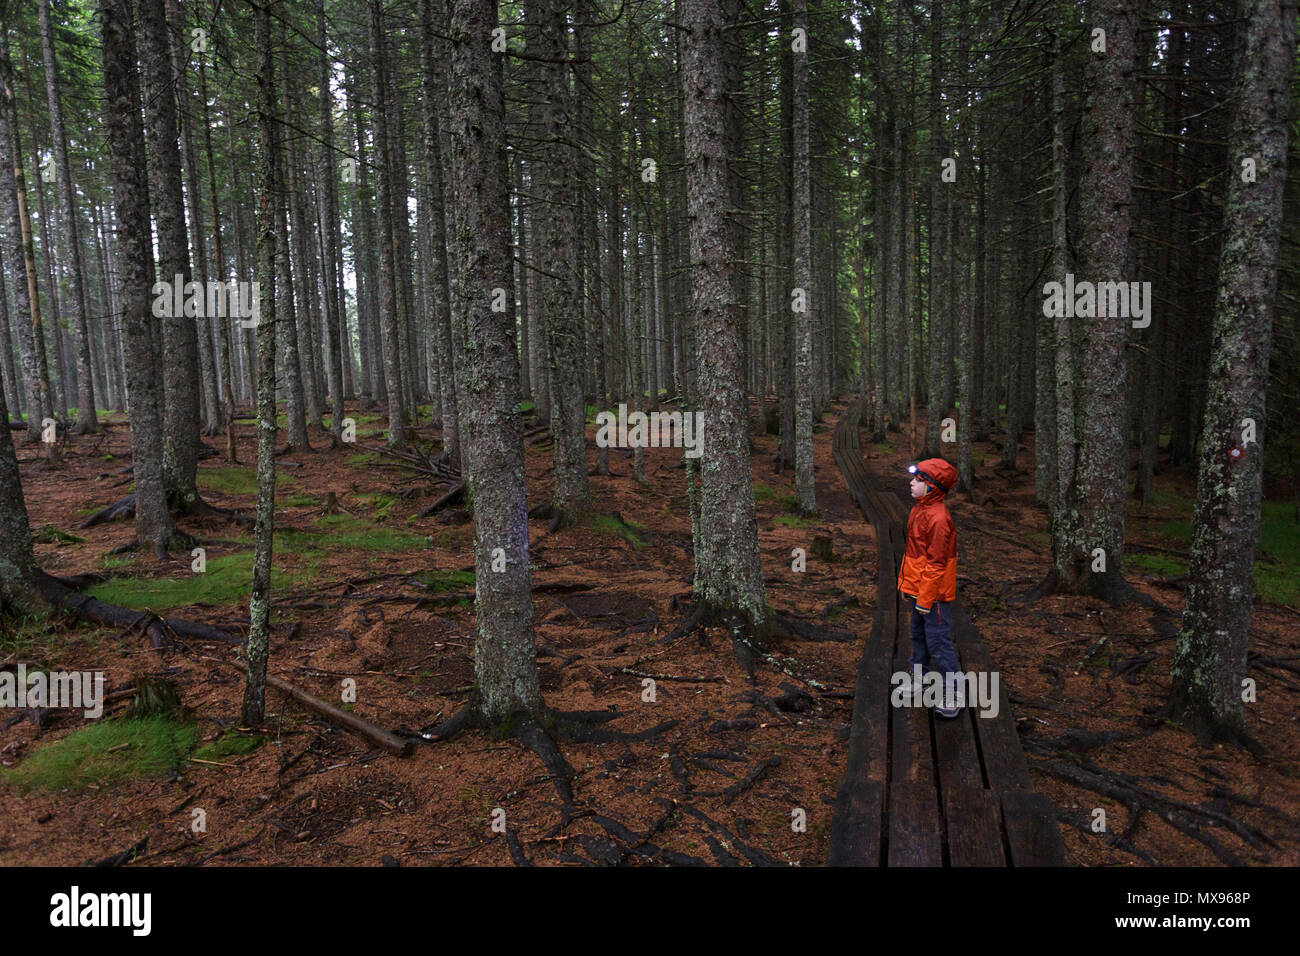 Lonely young boy in orange rain jacket walking on forest boardwalk in dark, moody woods with a head lamp on his head Stock Photo